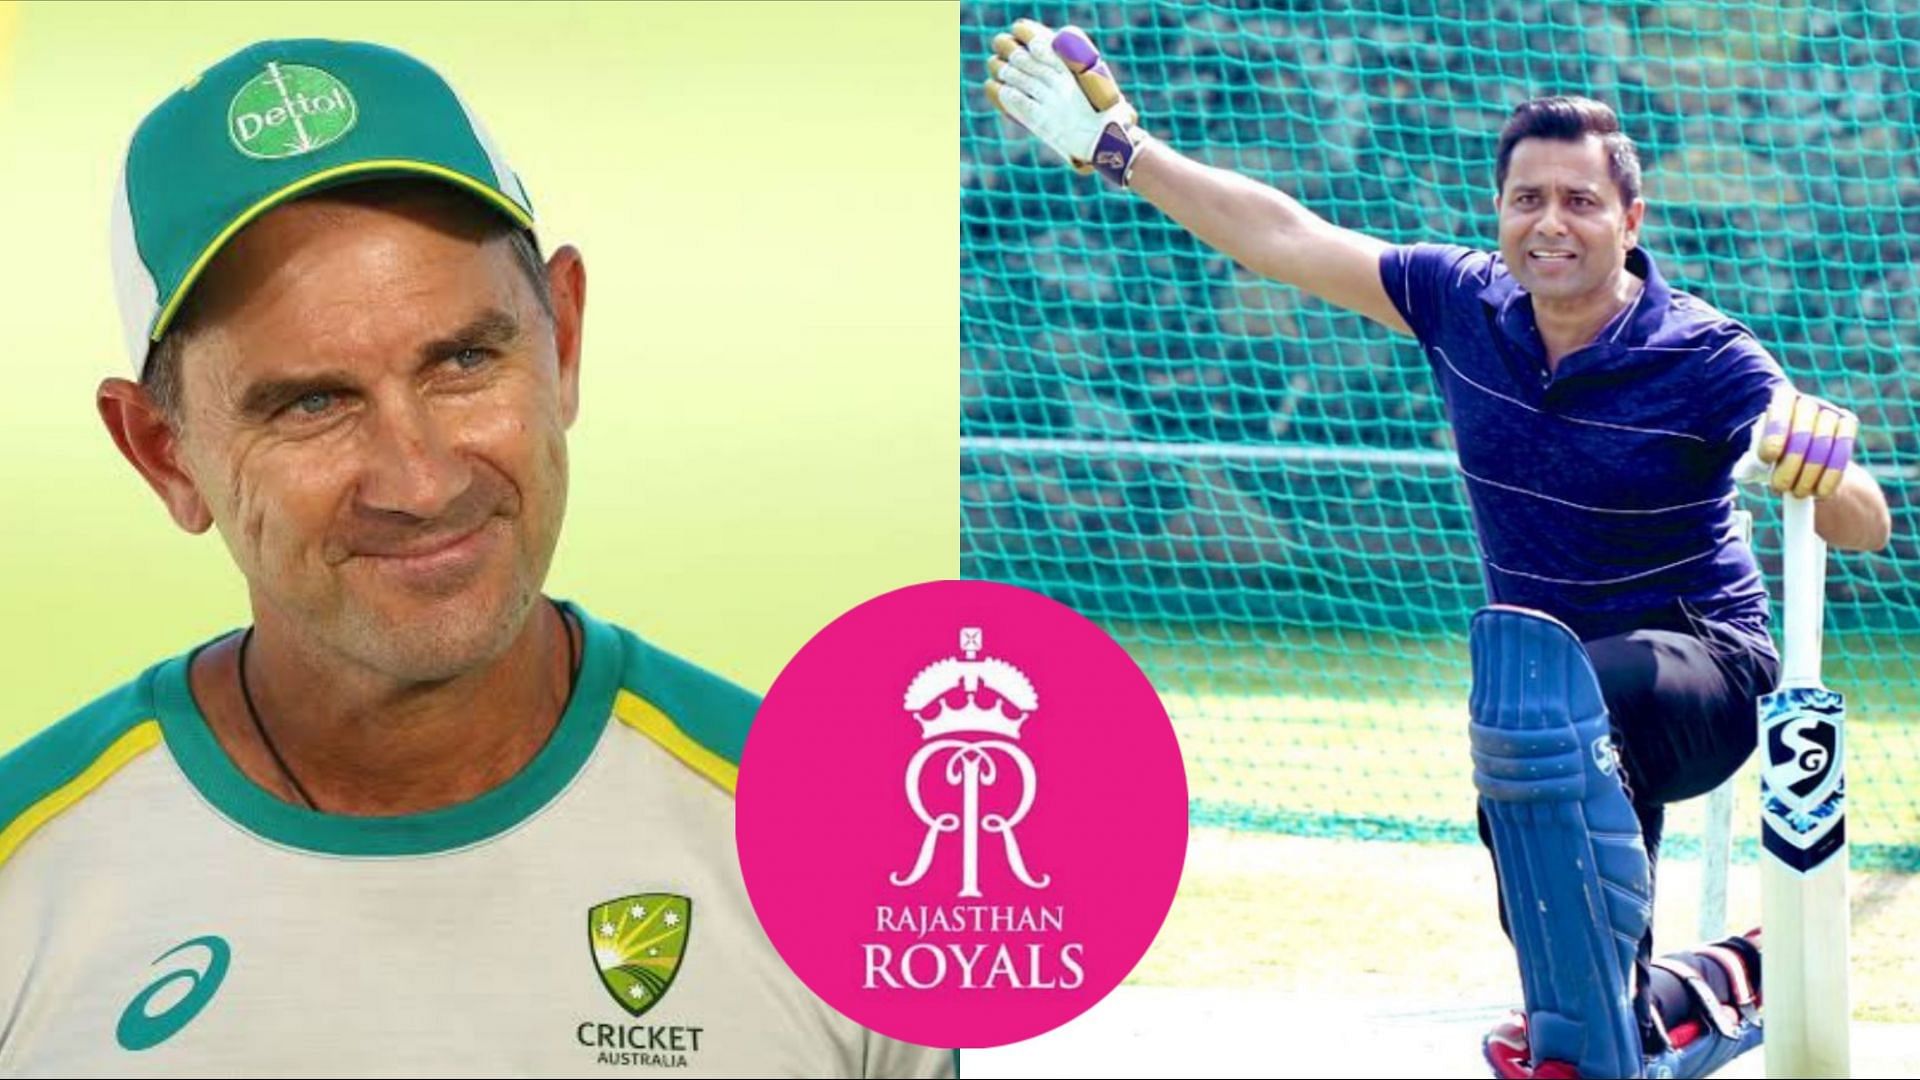 Justin Langer (L) and Aakash Chopra were part of the Rajasthan Royals squad once but they never played for the franchise in an IPL match